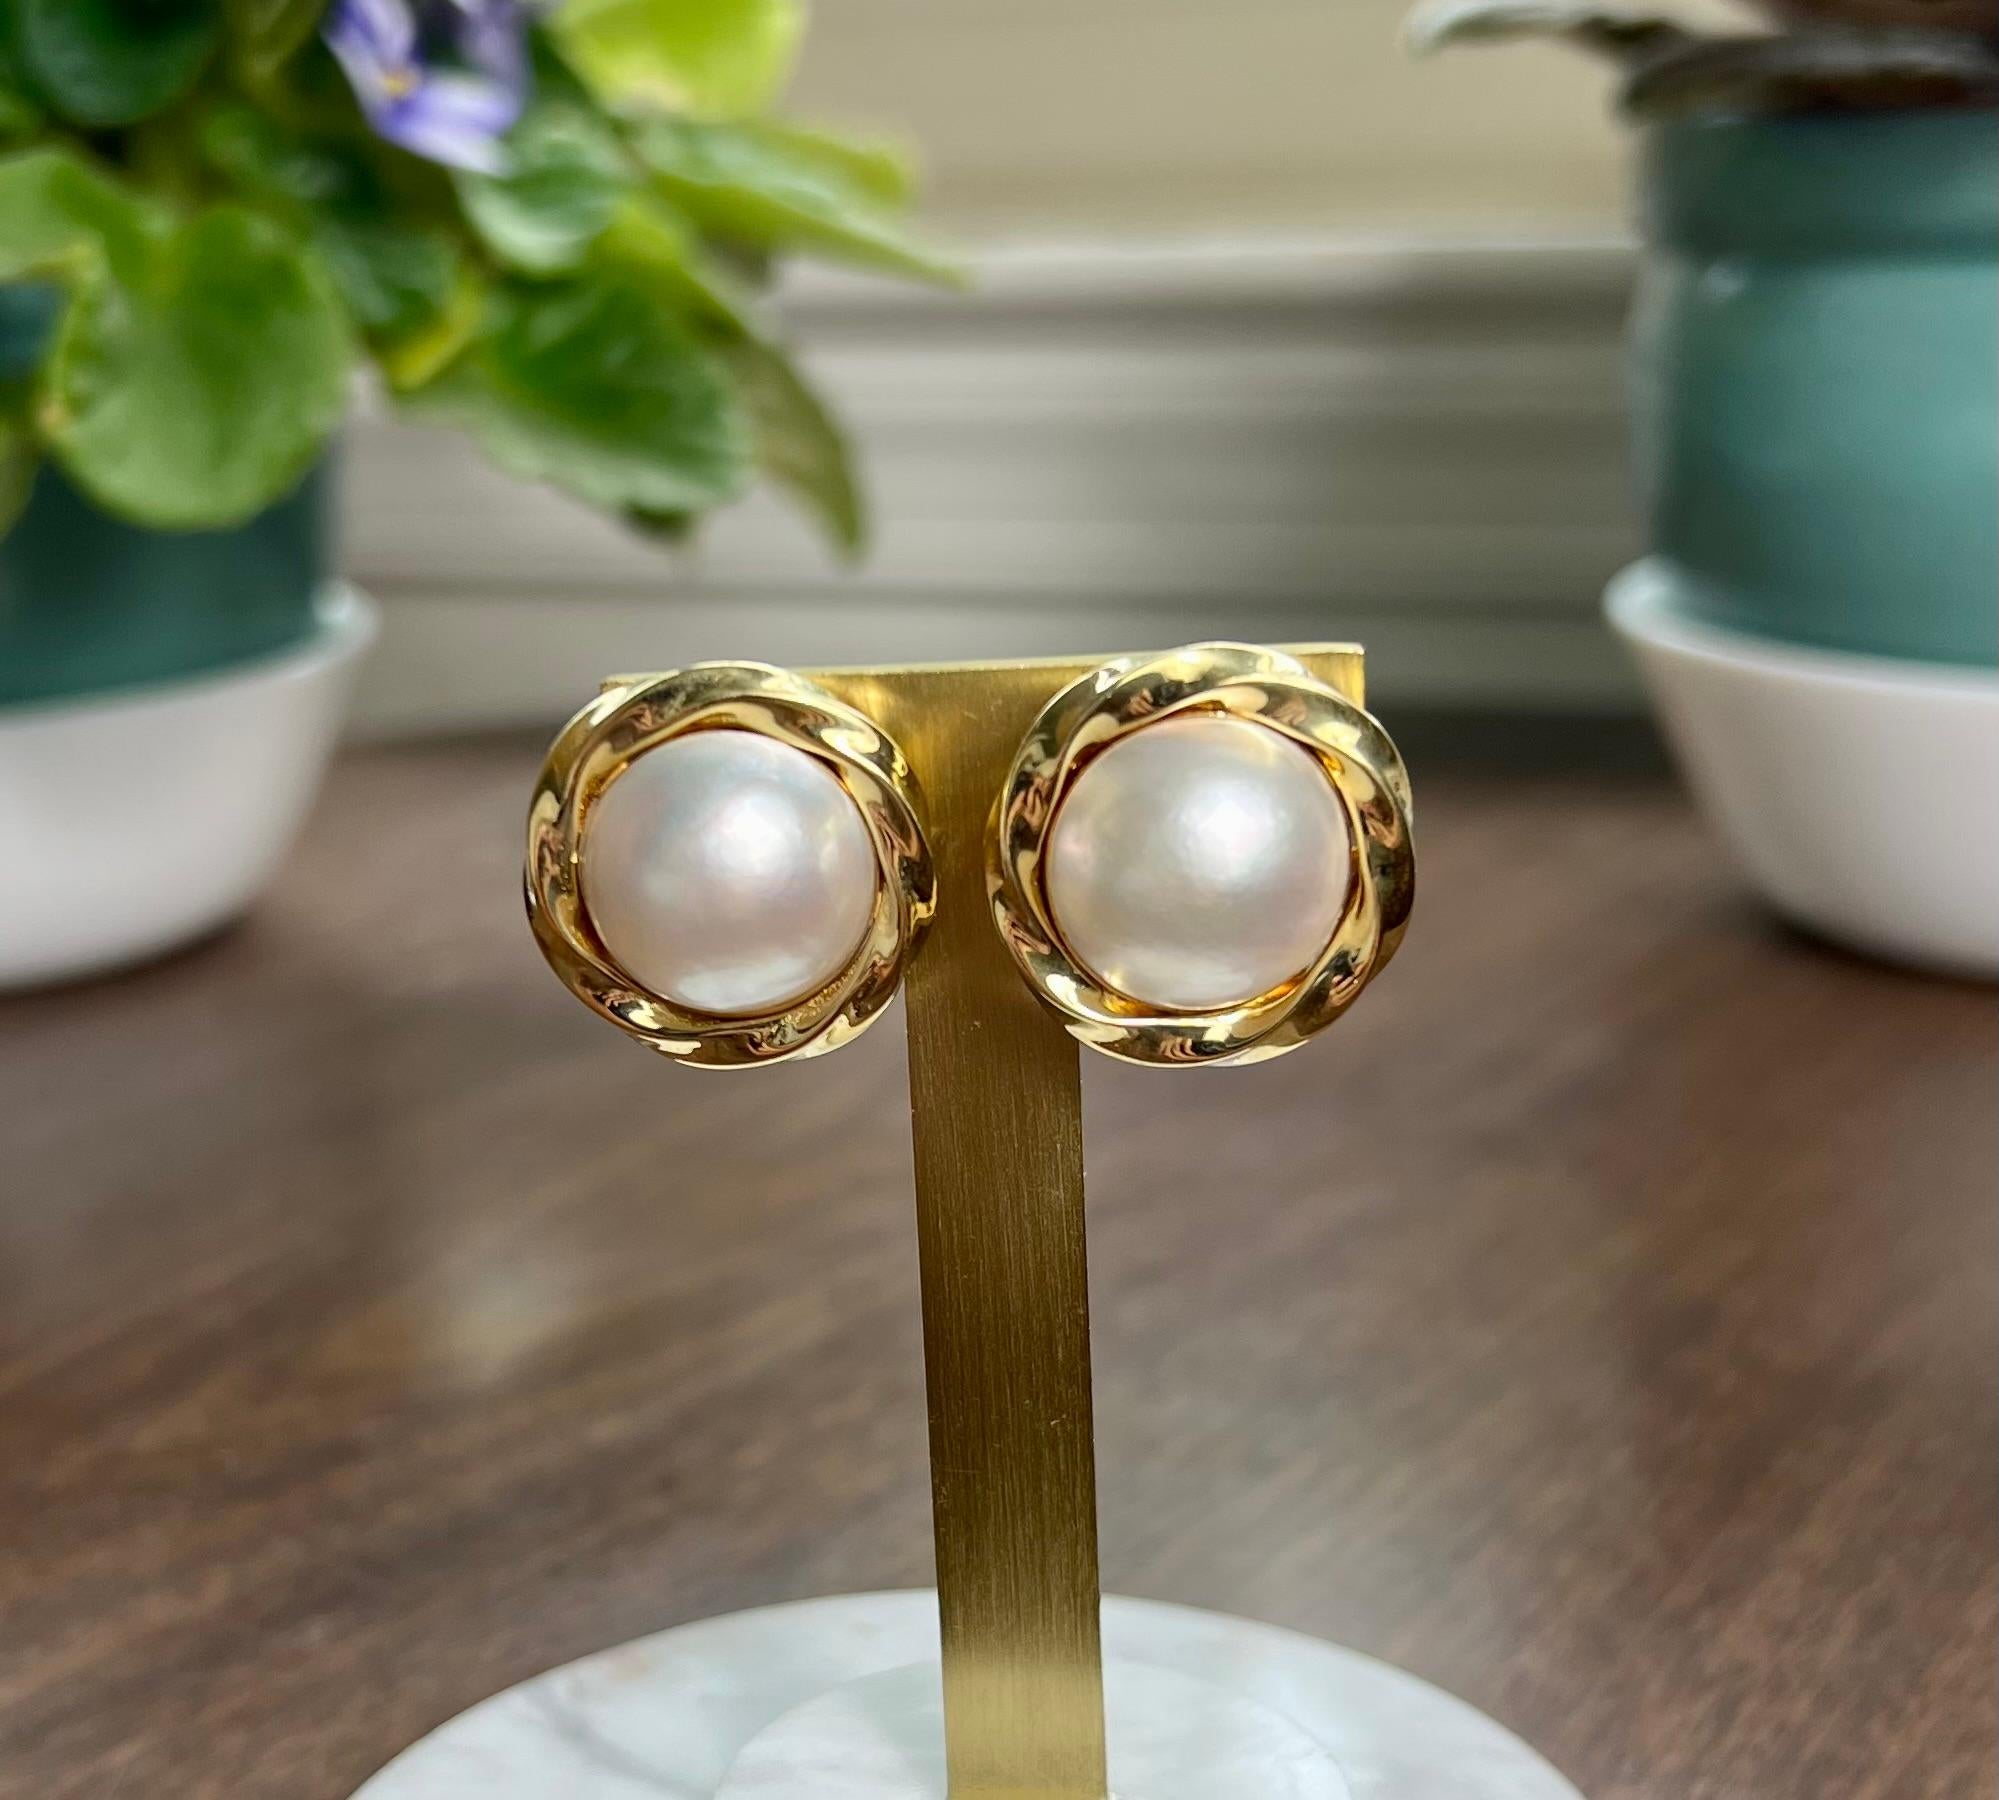 One pair of mabe pearl earrings measuring 23.16mm set in 18 karat yellow gold complete with Omega back closures.  The earrings weigh 25.3 grams in total.  